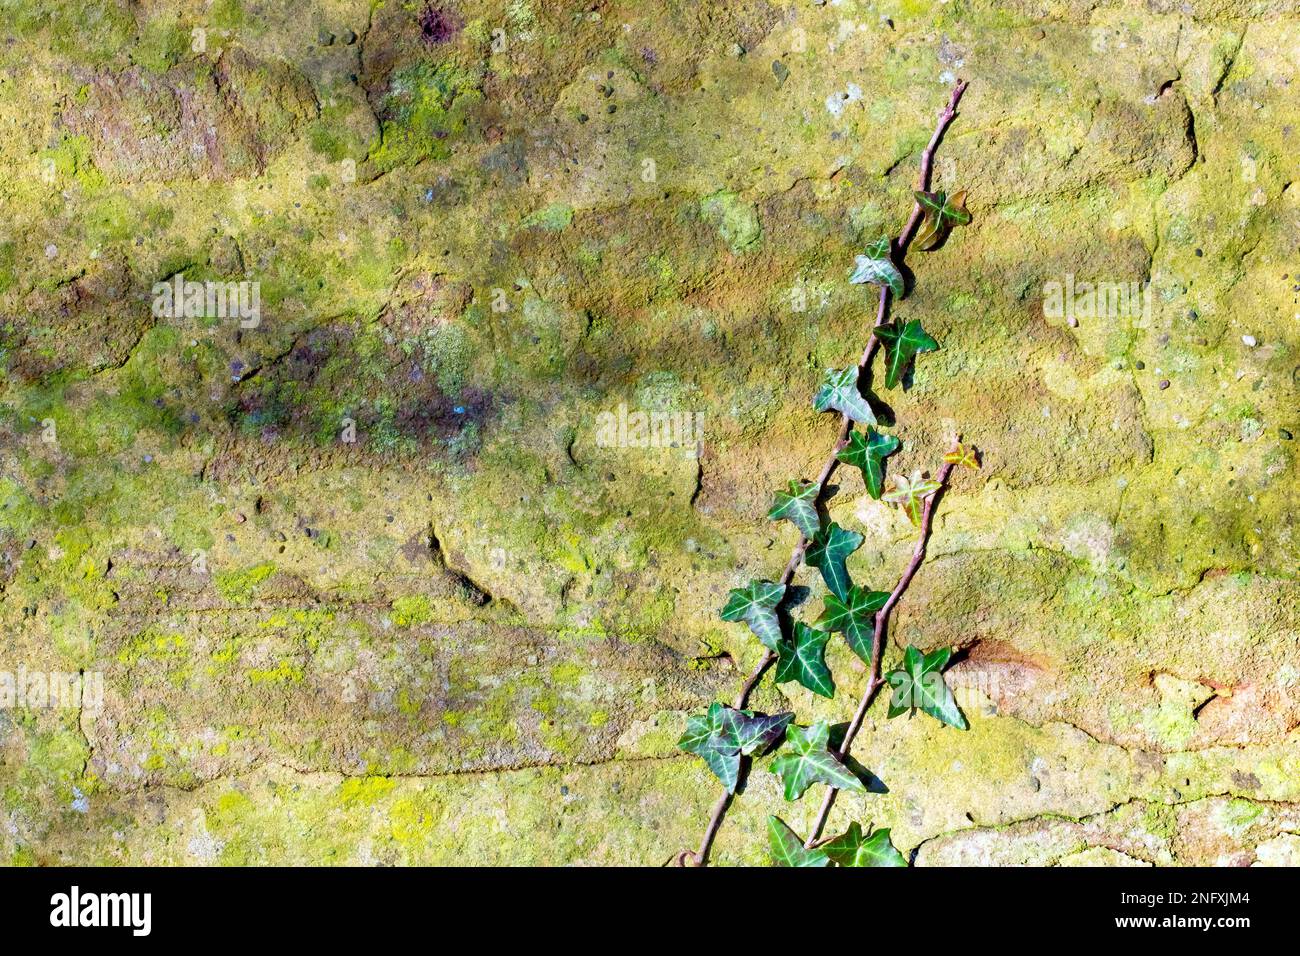 Close up of an old, sunlit, green, lichen covered wall with two tendrils of Ivy (hedera helix) climbing up one side of it. Stock Photo